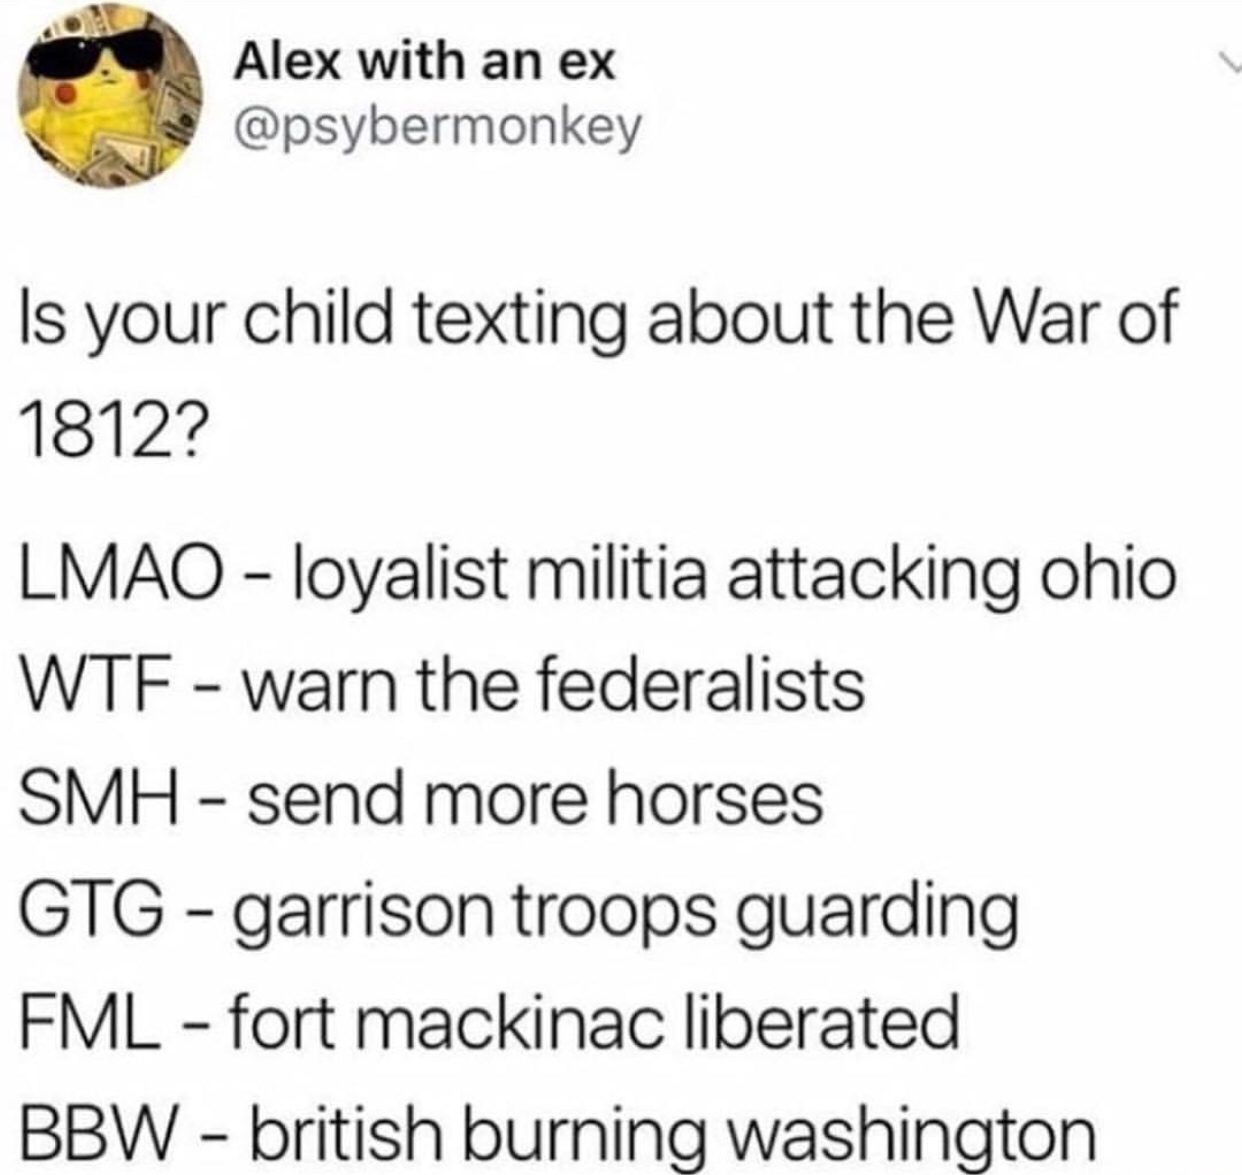 memes - 4 3 2 1 workout - Alex with an ex Is your child texting about the War of 1812? Lmao loyalist militia attacking ohio Wtf warn the federalists Smh send more horses Gtg garrison troops guarding Fml fort mackinac liberated Bbw british burning washingt